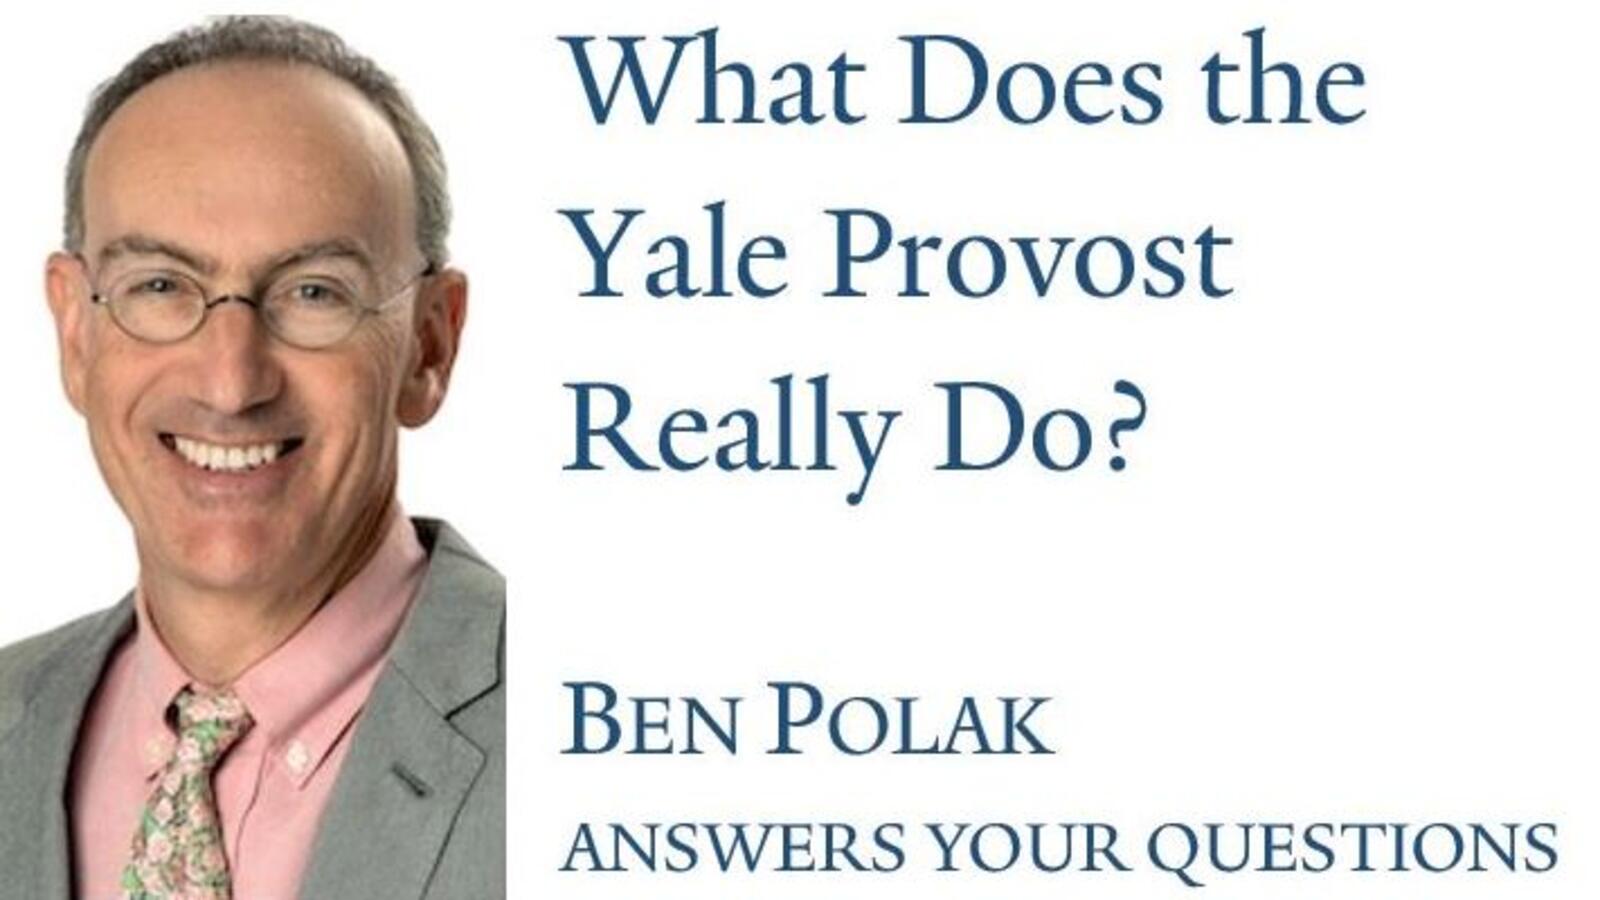 What Does the Yale Provost Really Do?